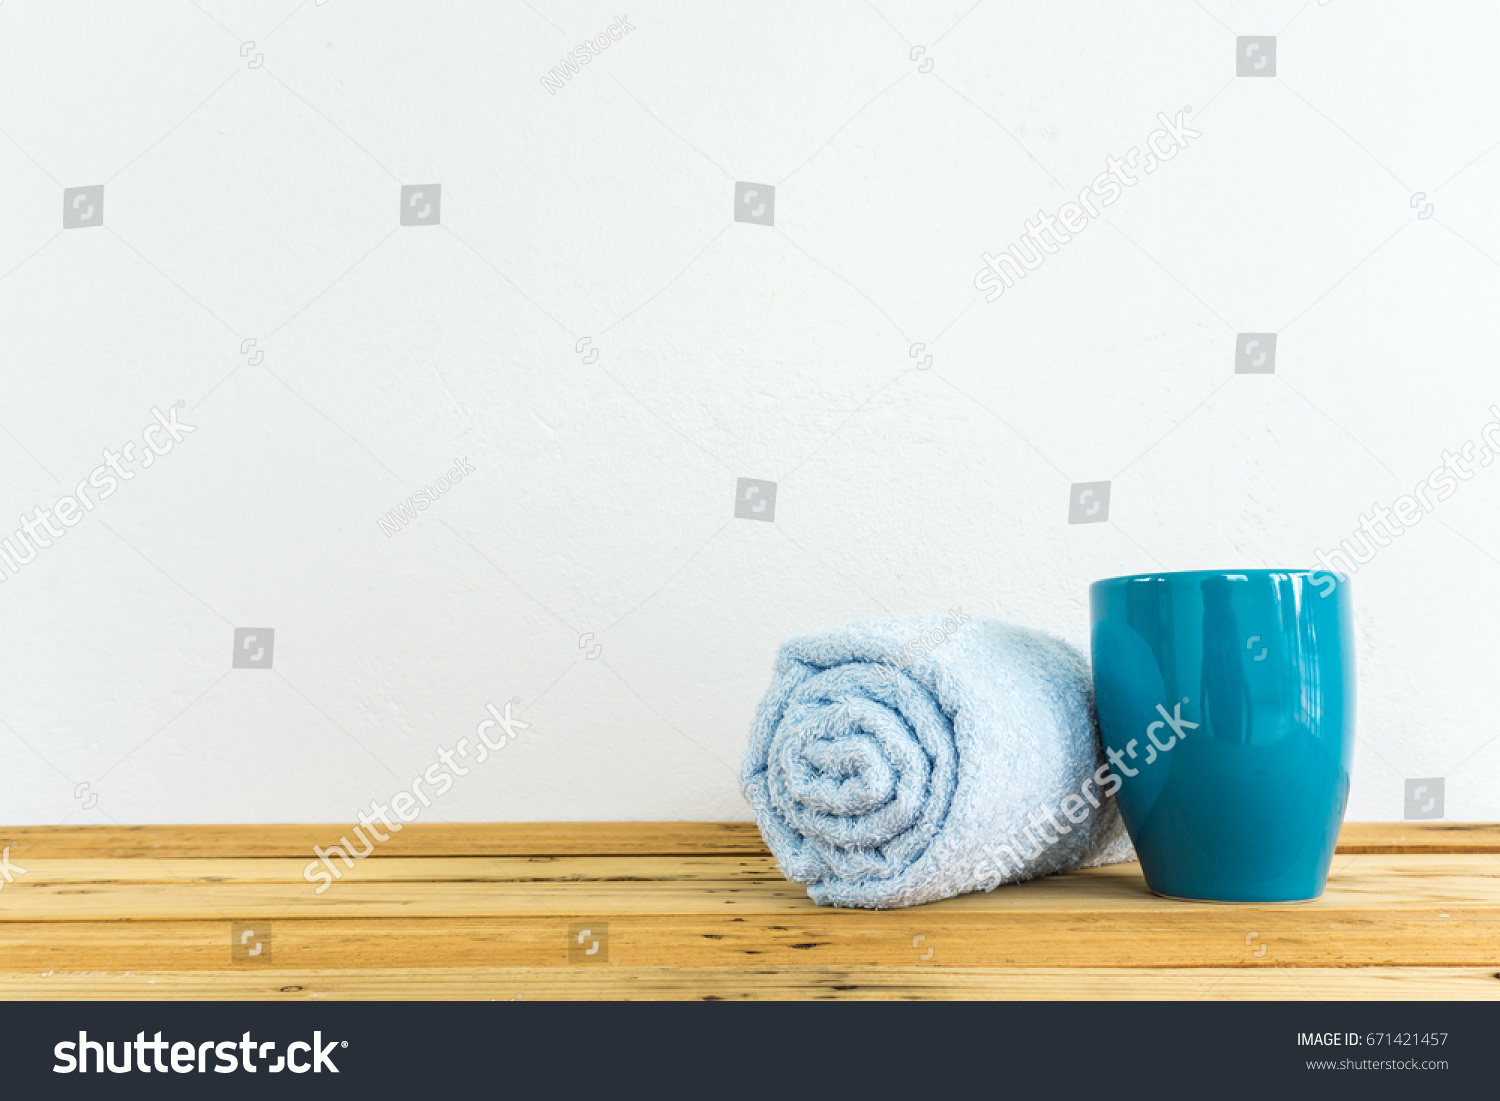 teal color coffee cup and cyan towel on wooden table with white cement wall background #671421457